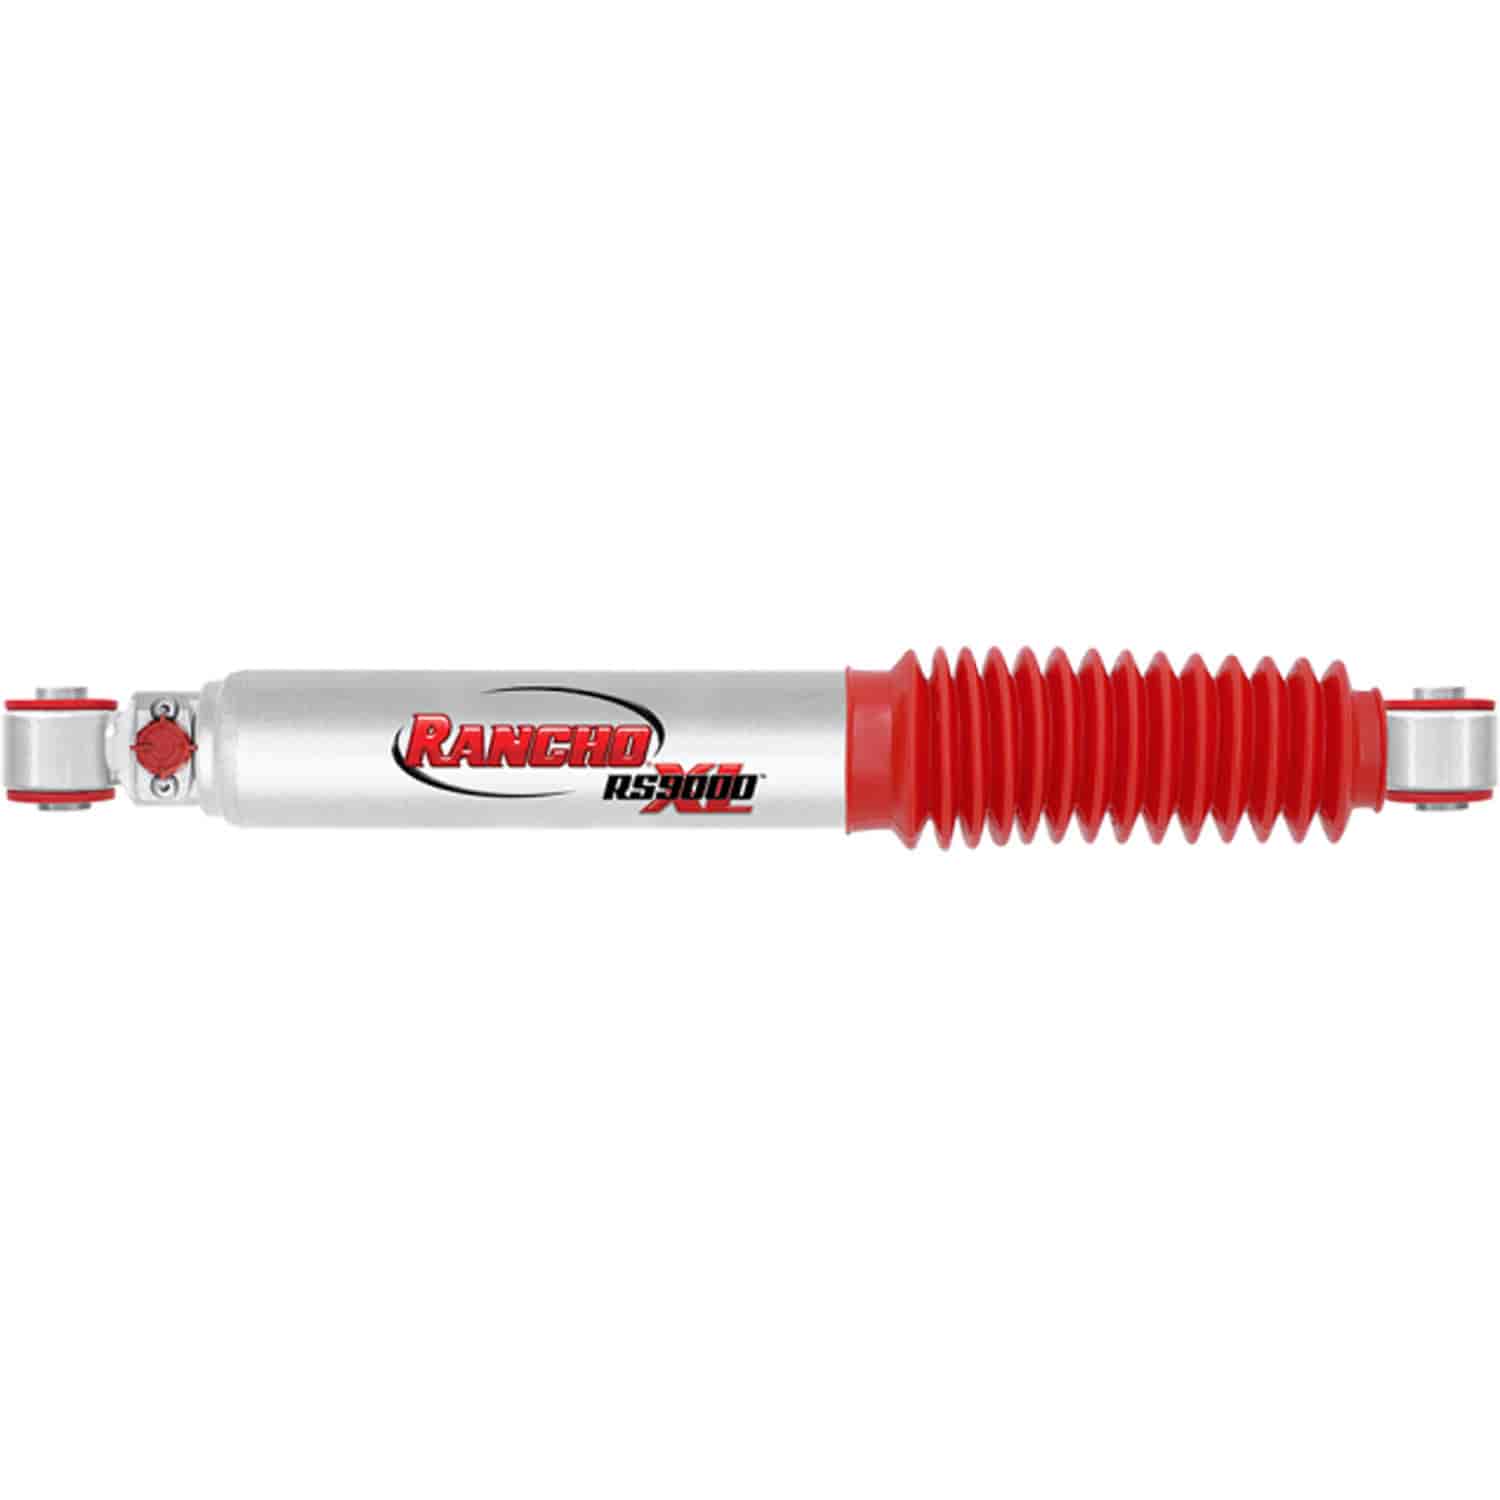 RS9000XL Rear Shock Absorber Fits Mitsubishi L200 and Triton